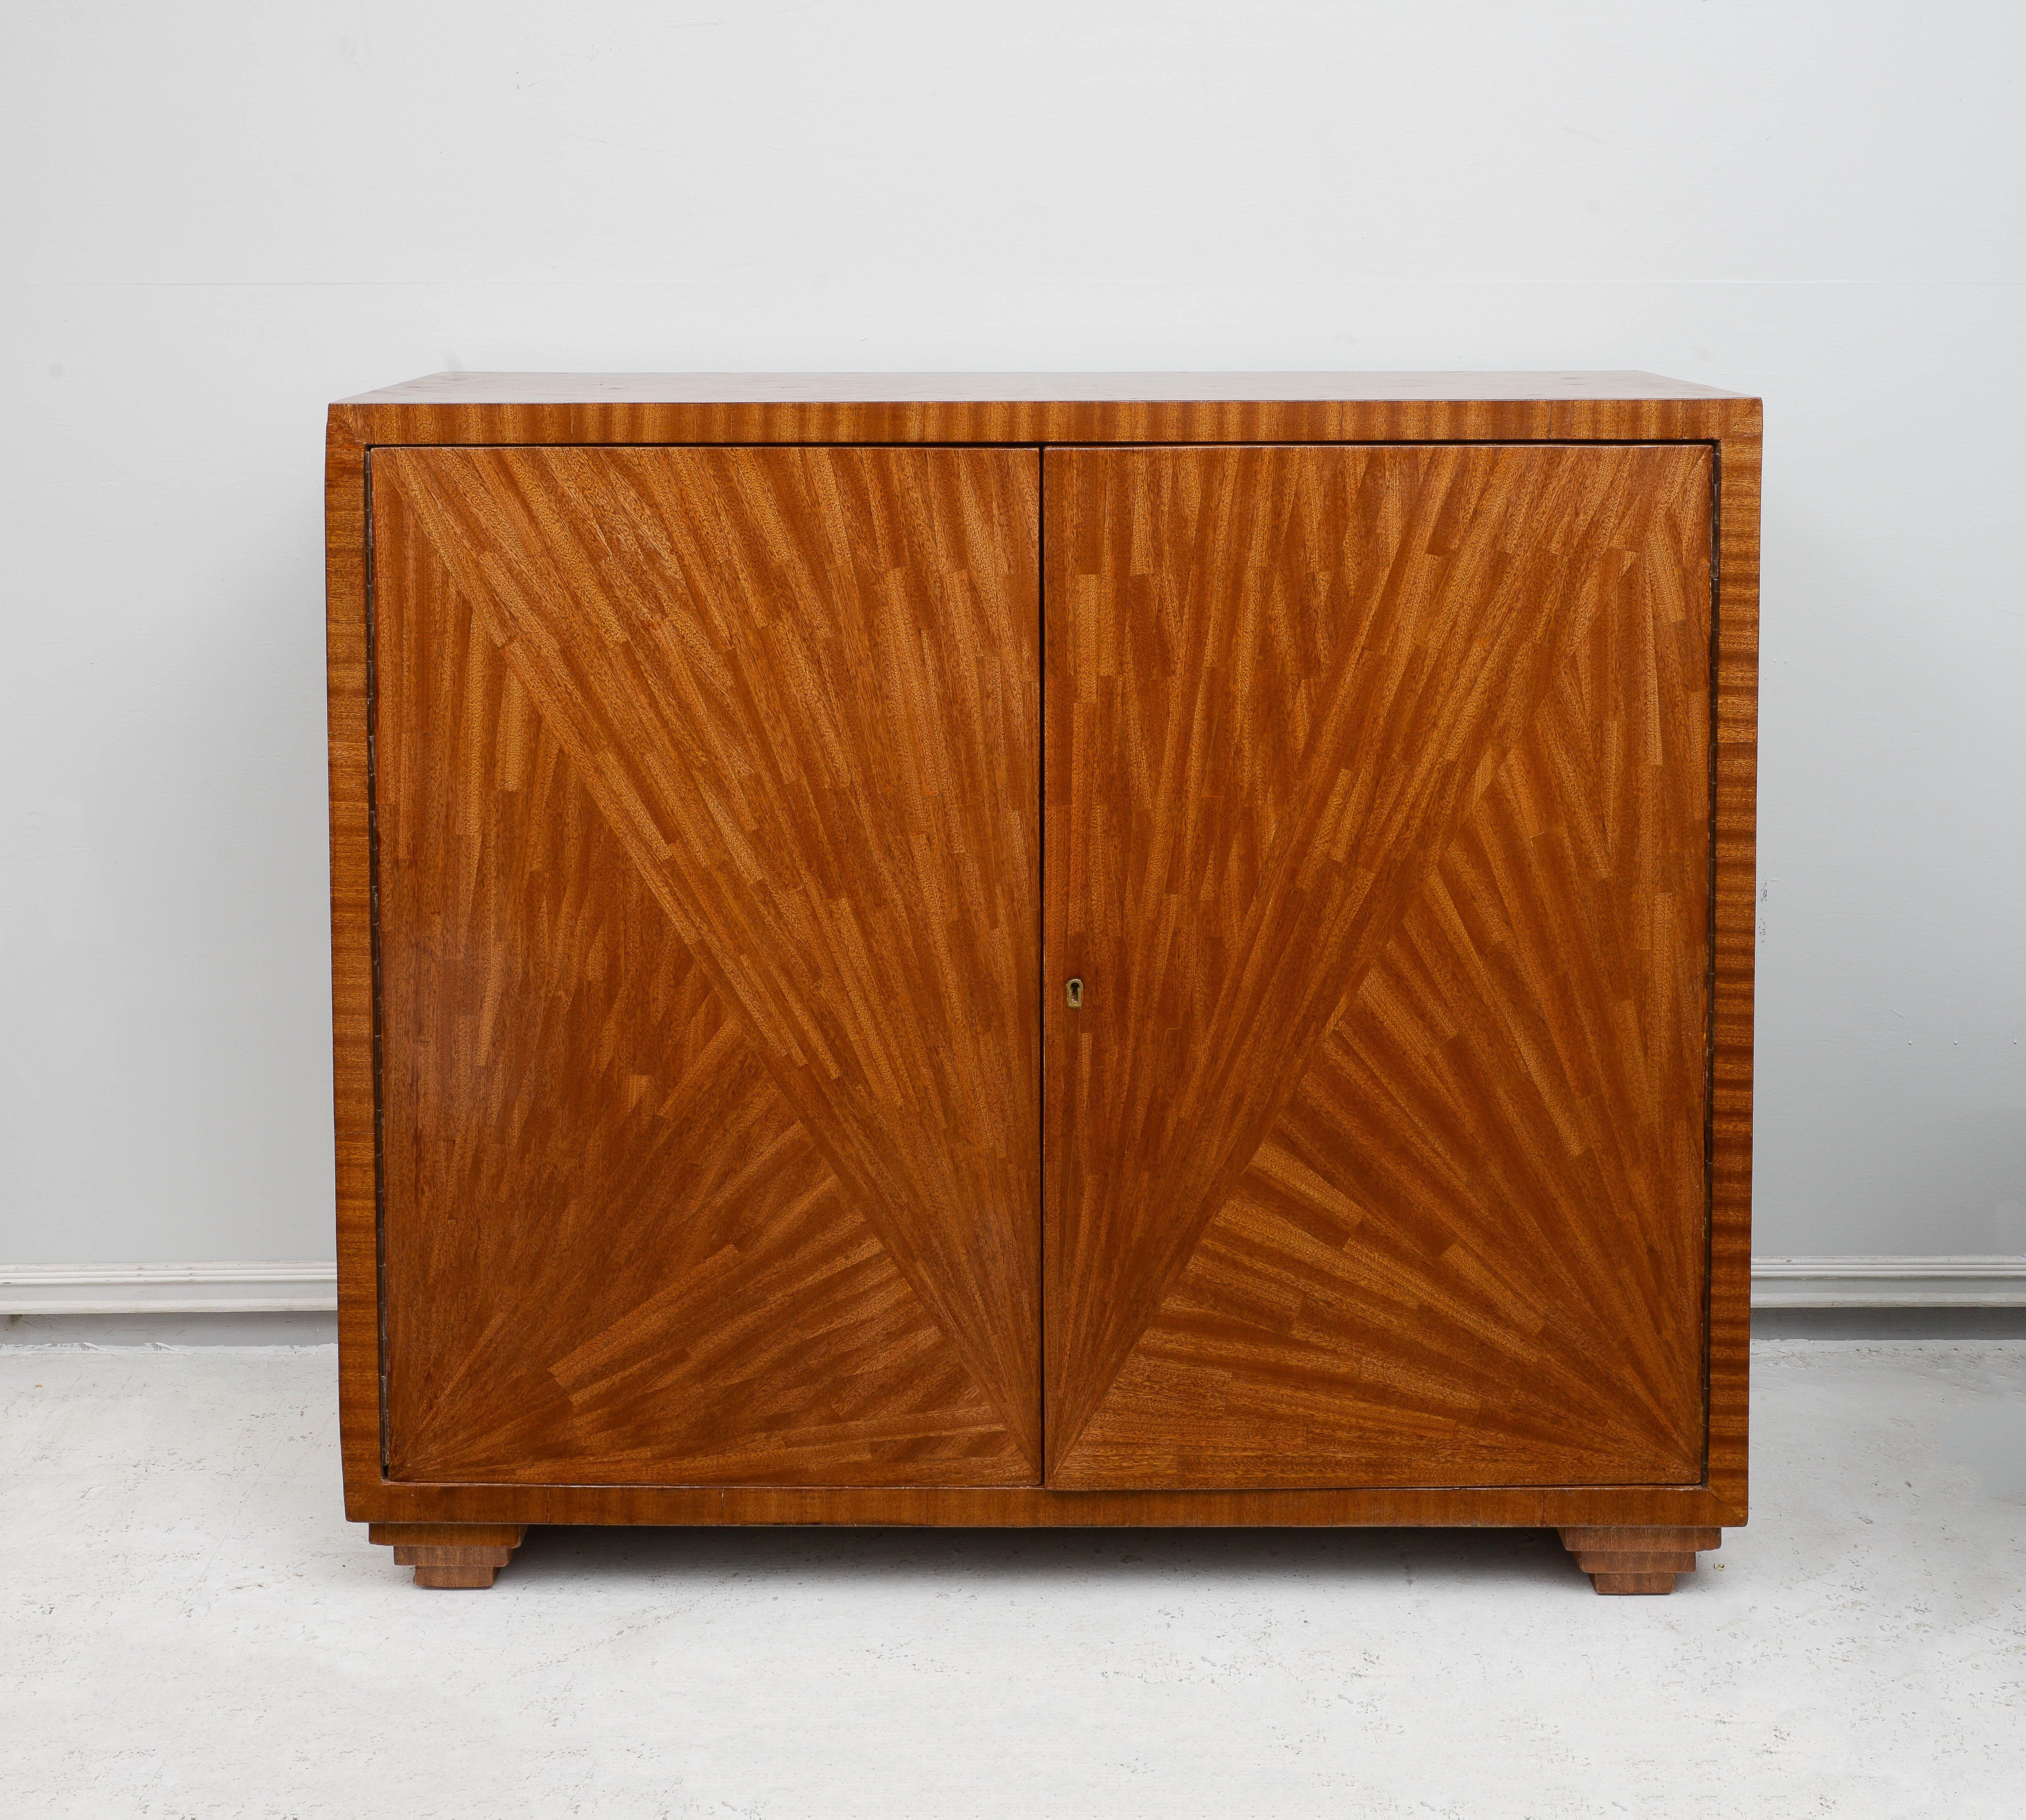 Wood Jean-Michel Frank Inspired Exquisitely Crafted Parquetry Cabinet For Sale